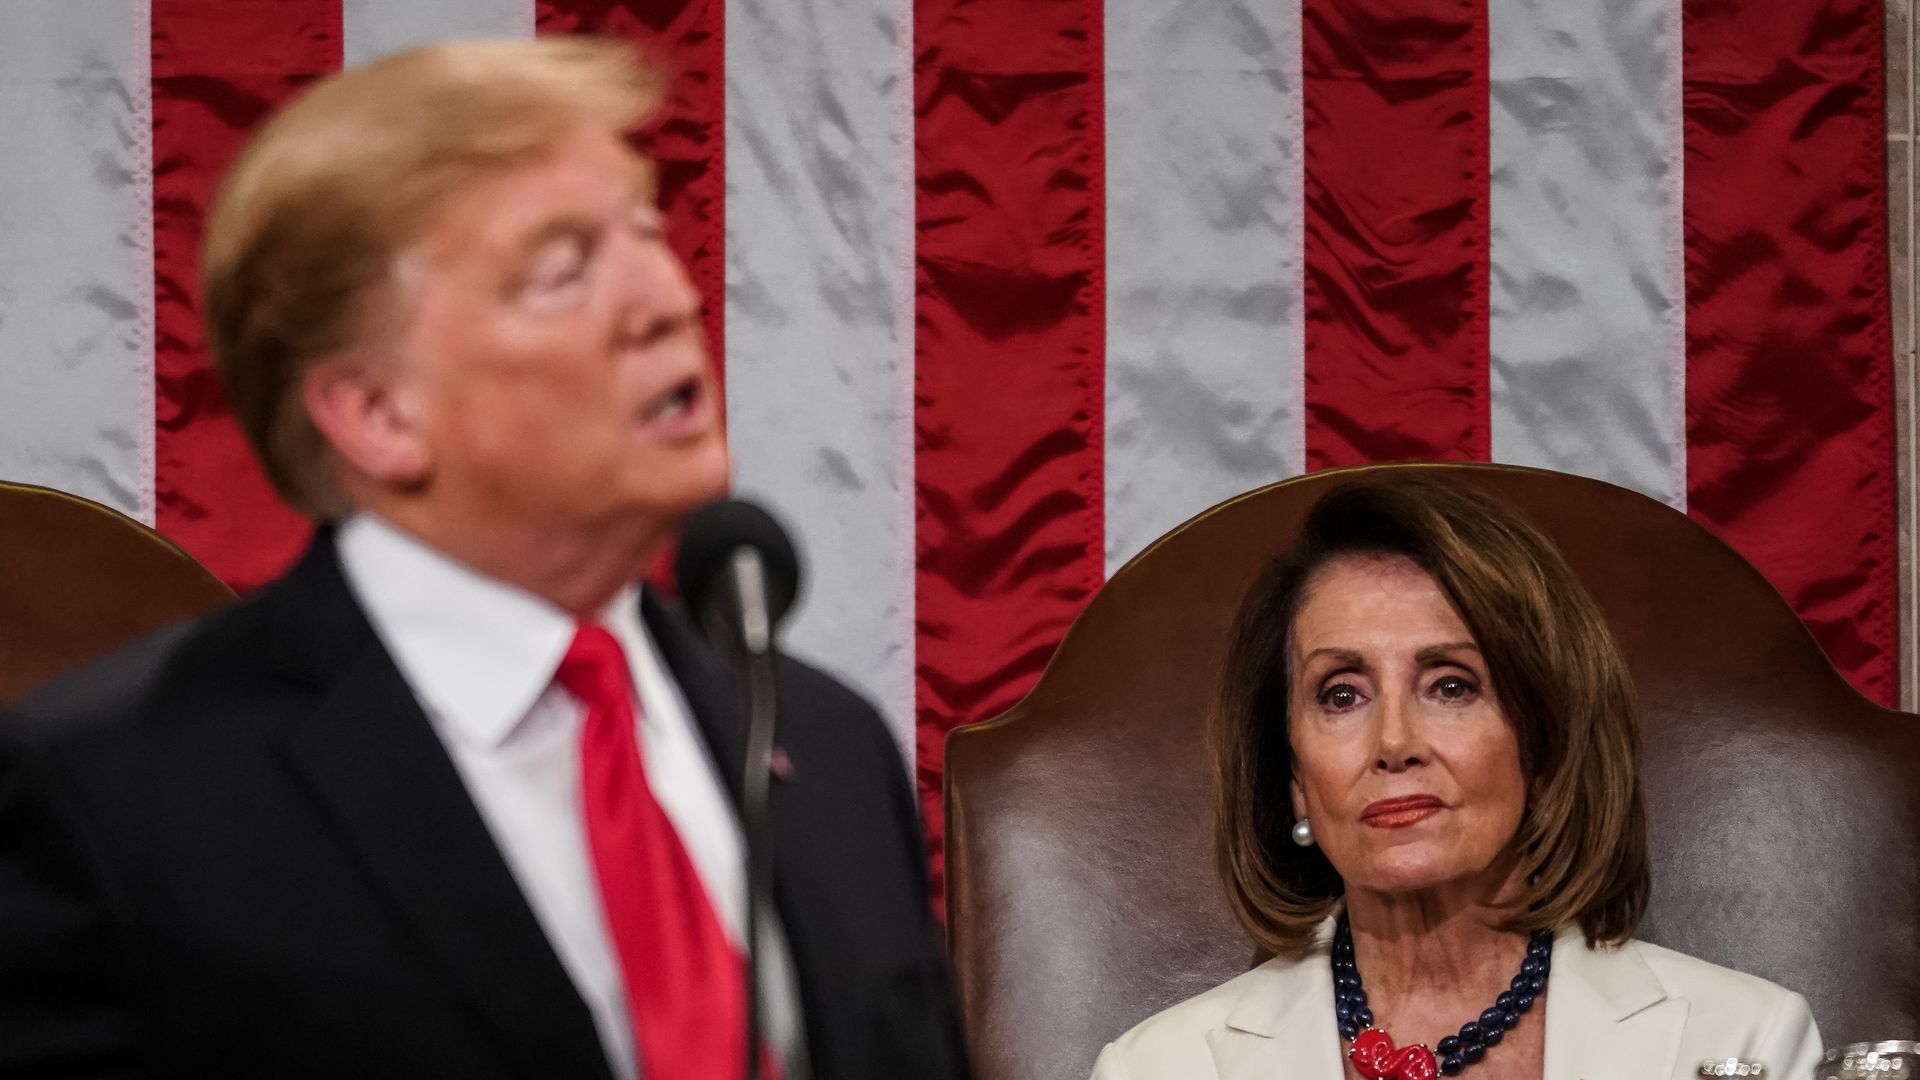  Speaker Nancy Pelosi looks on as U.S. President Donald Trump delivers the State of the Union address in the chamber of the U.S. House of Representatives at the U.S. Capitol Building on February 5.